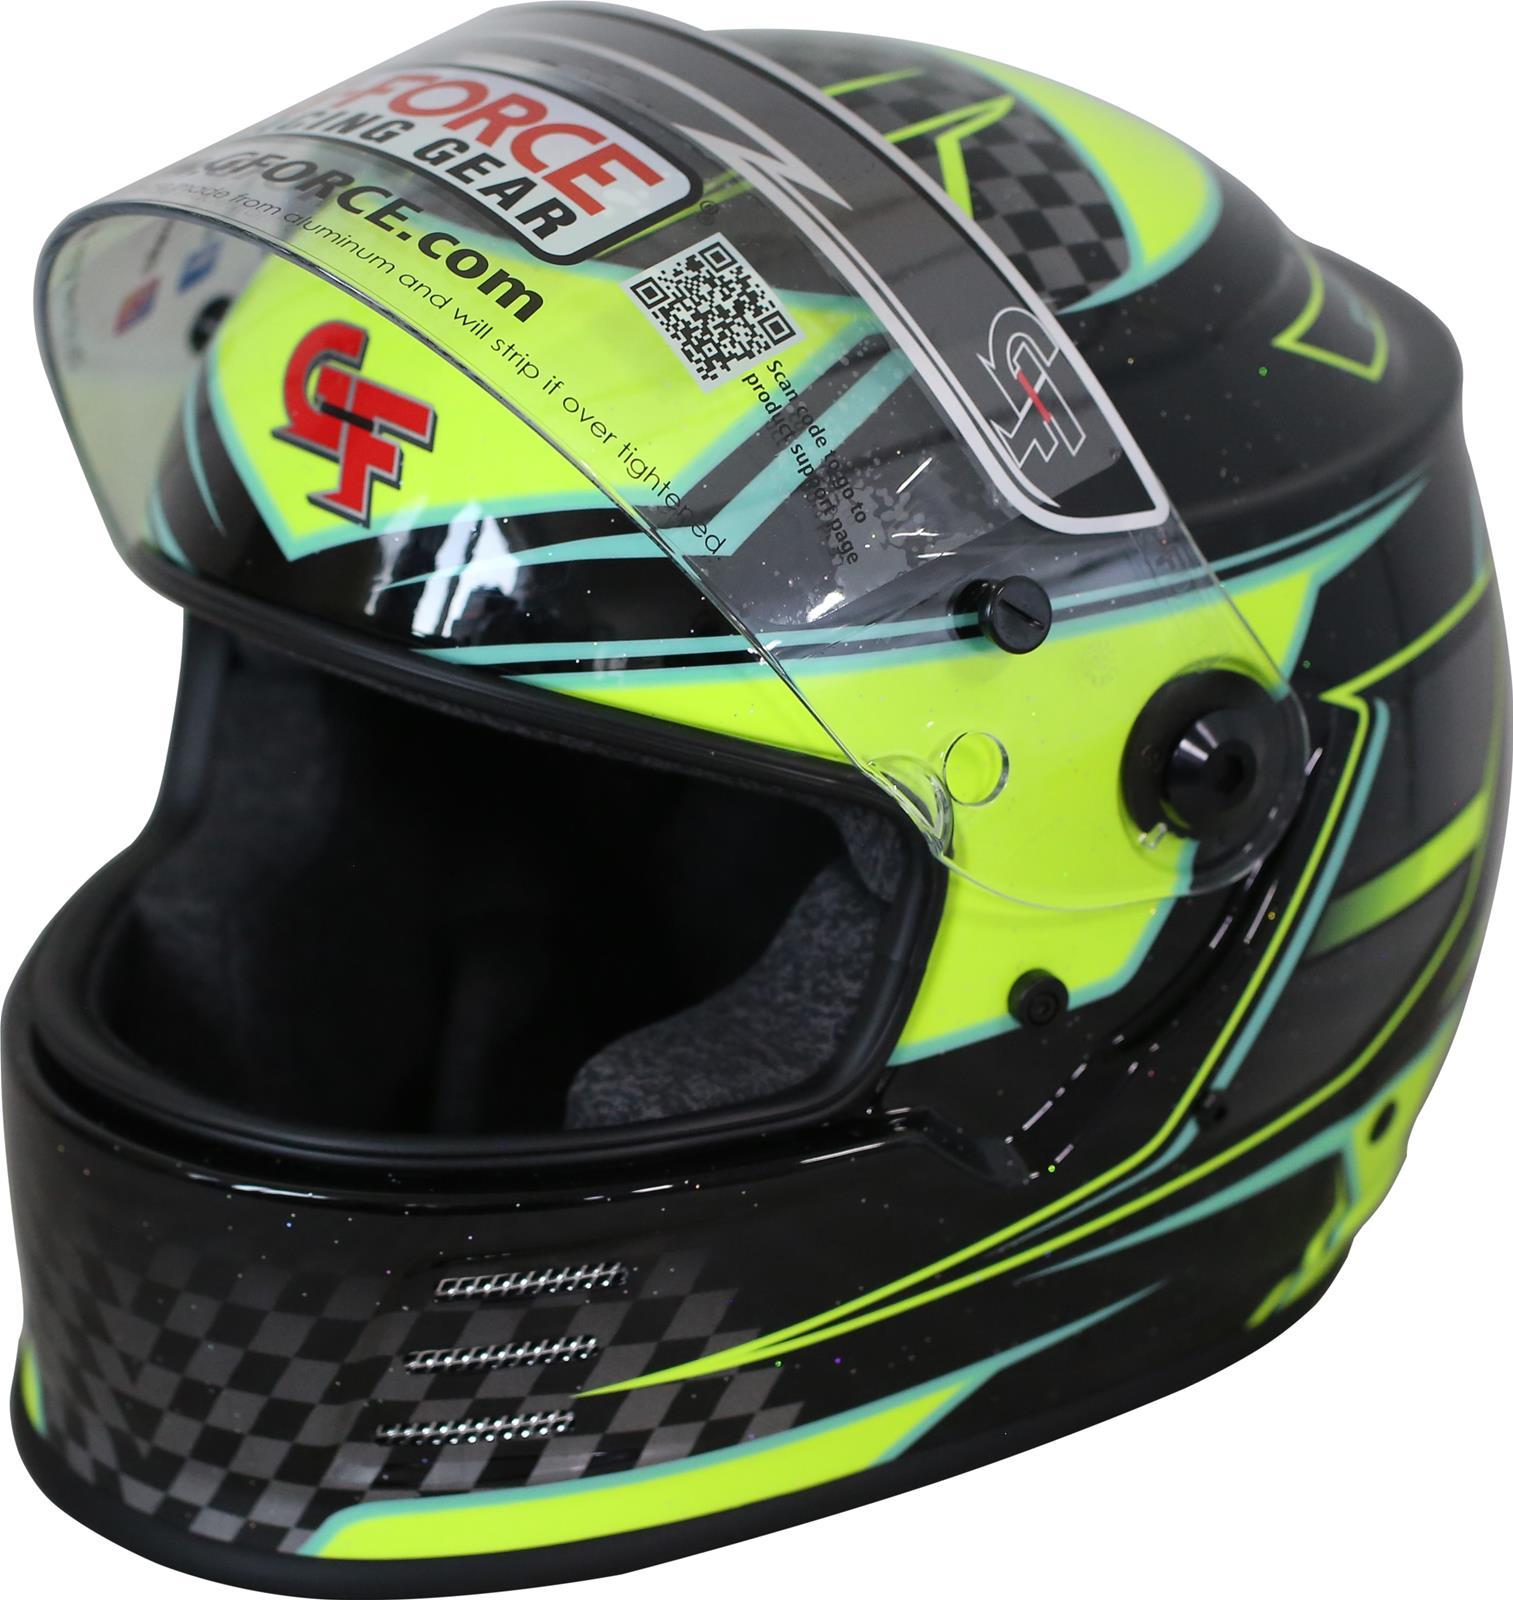 G-Force Racing Gear 13005XSMYL Helmet, Revo Graphics, Full Face, Snell SA2020, Head and Neck Support Ready, Black / Yellow, X-Small, Each